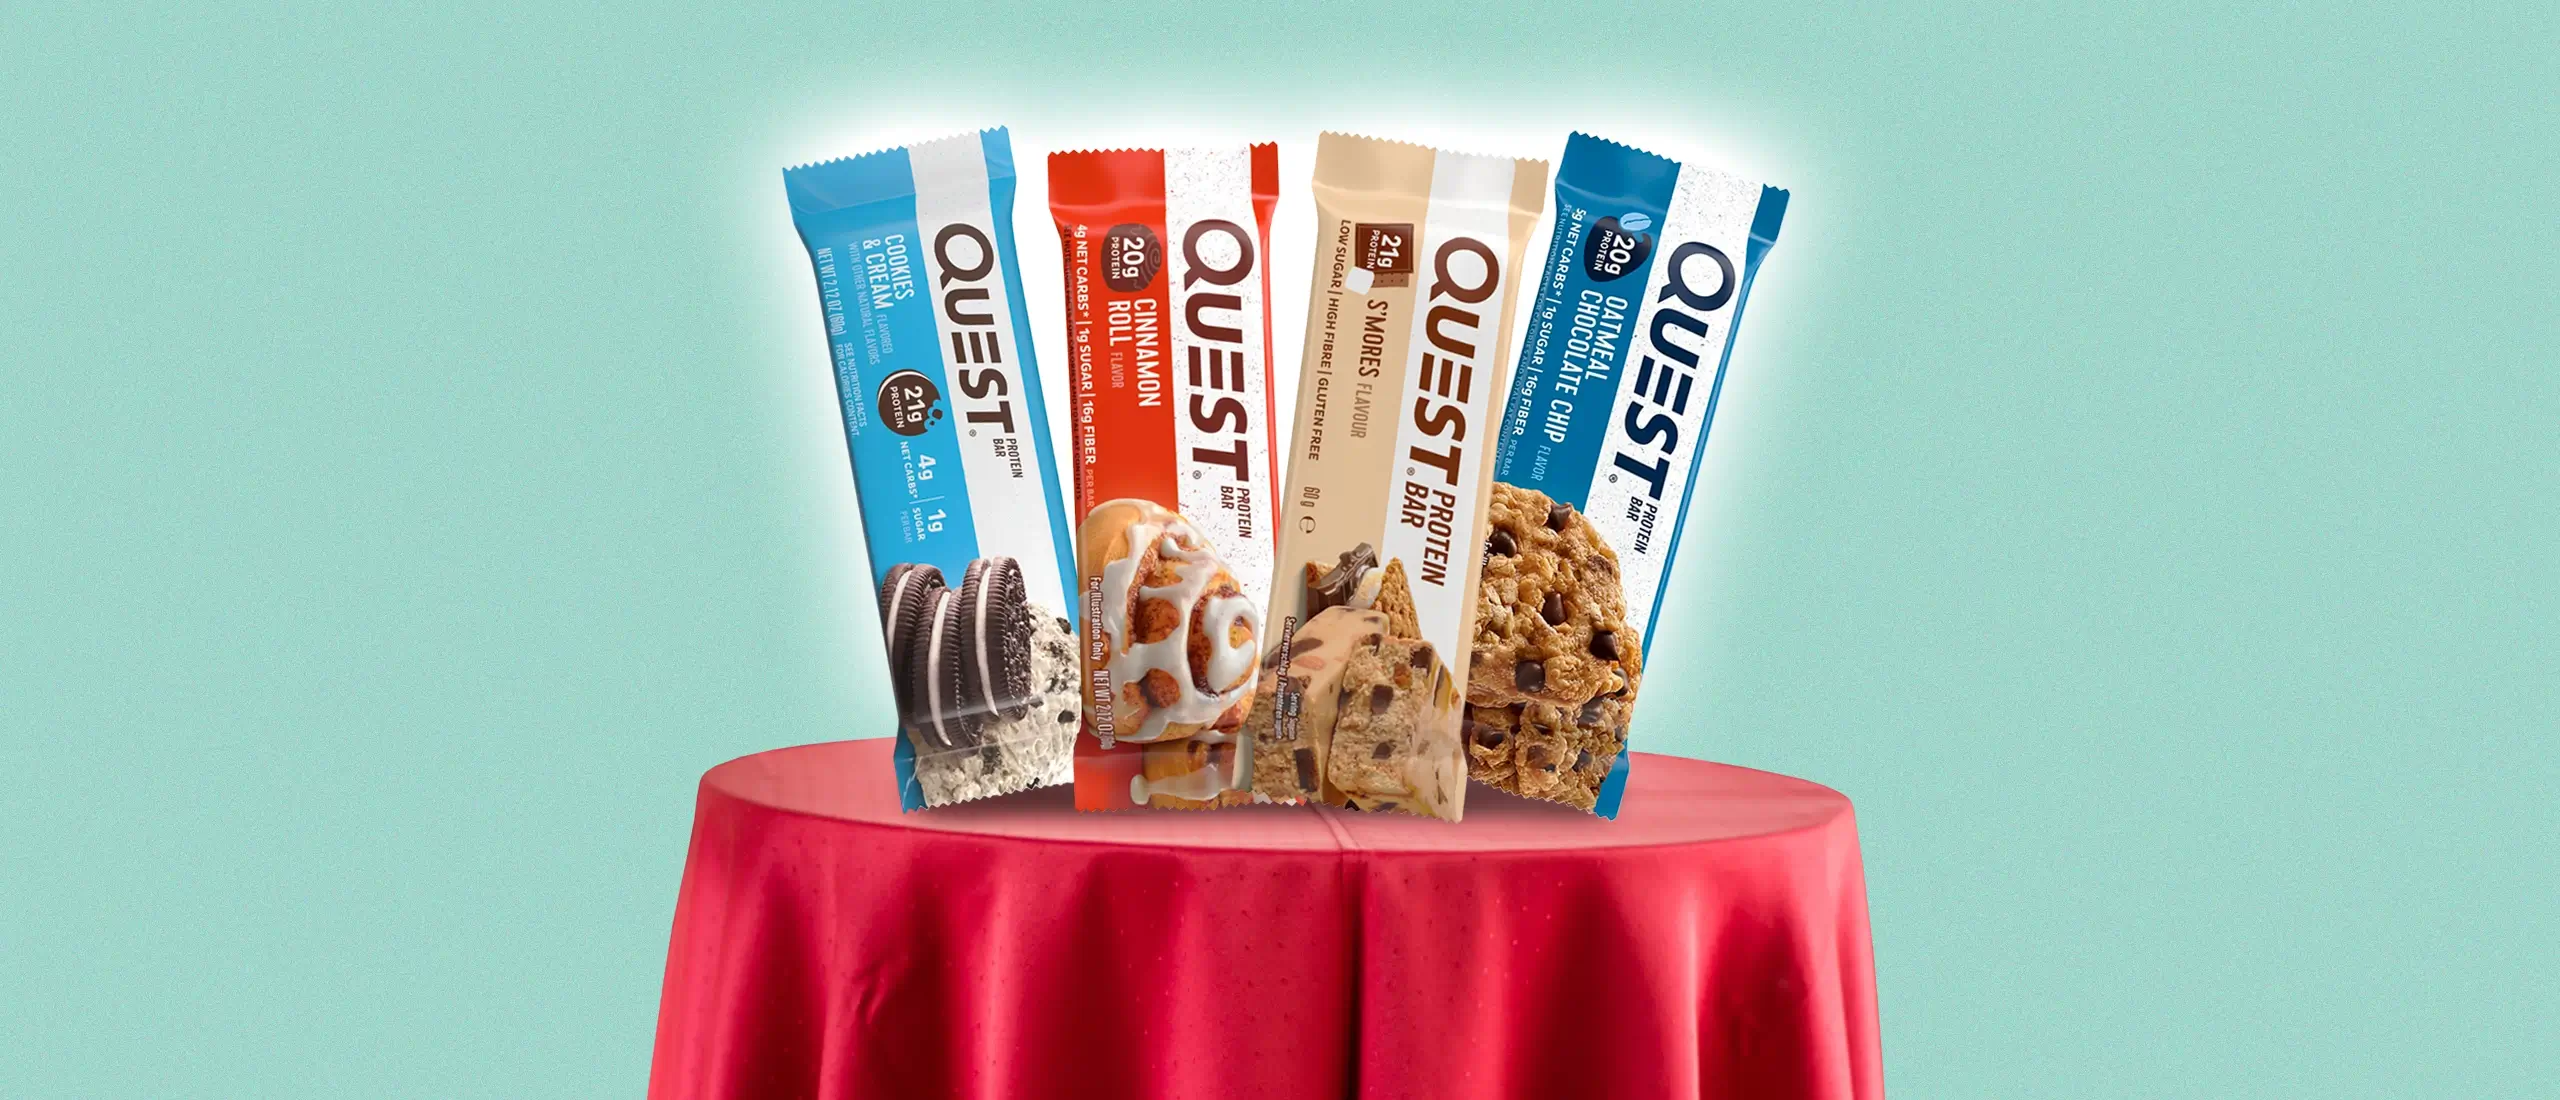 Quest Protein Bars on table with red table cloth